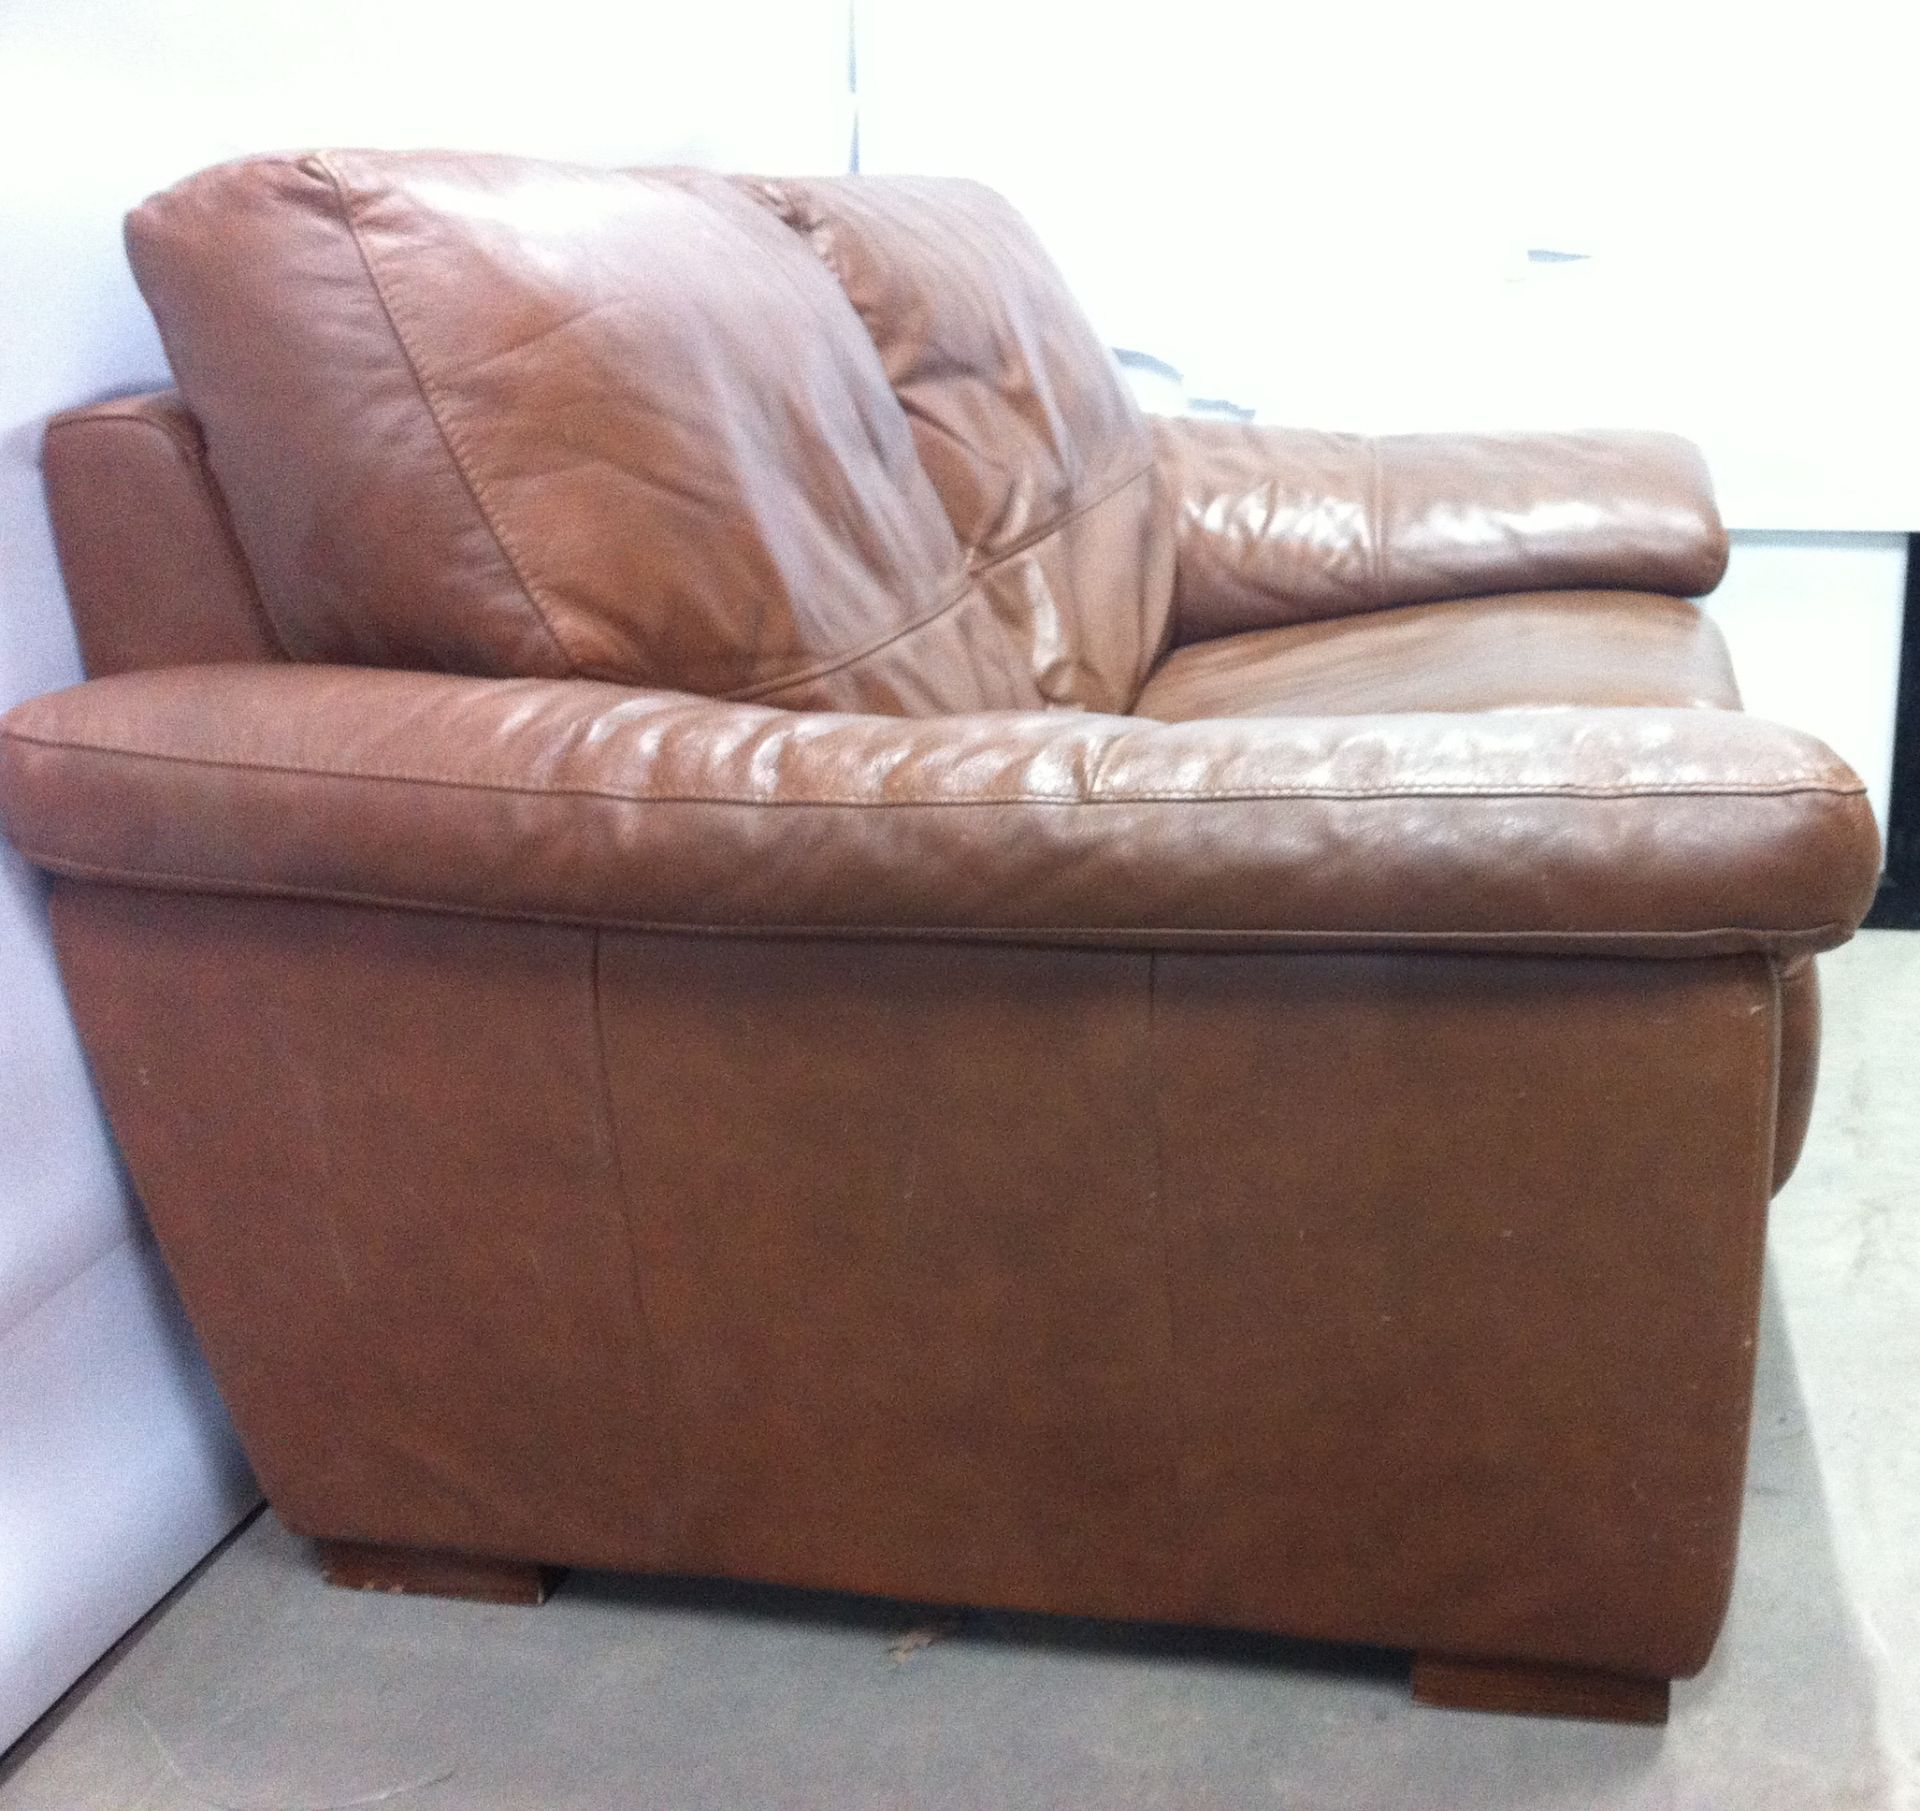 2 Seat Tan Faux Leather Couch - Image 4 of 4